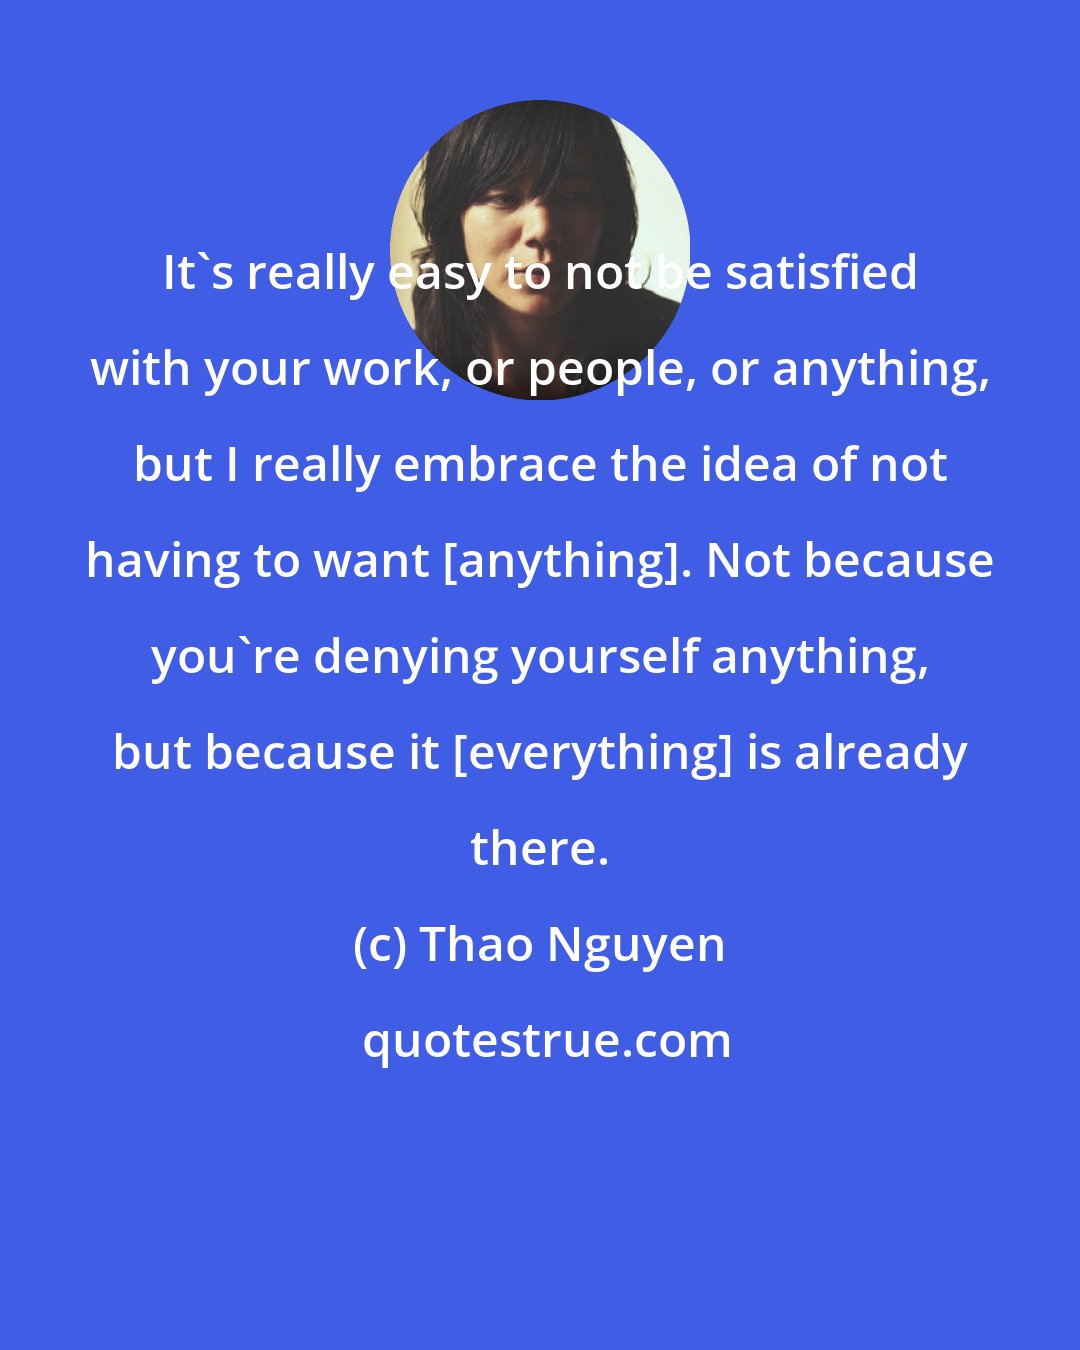 Thao Nguyen: It's really easy to not be satisfied with your work, or people, or anything, but I really embrace the idea of not having to want [anything]. Not because you're denying yourself anything, but because it [everything] is already there.